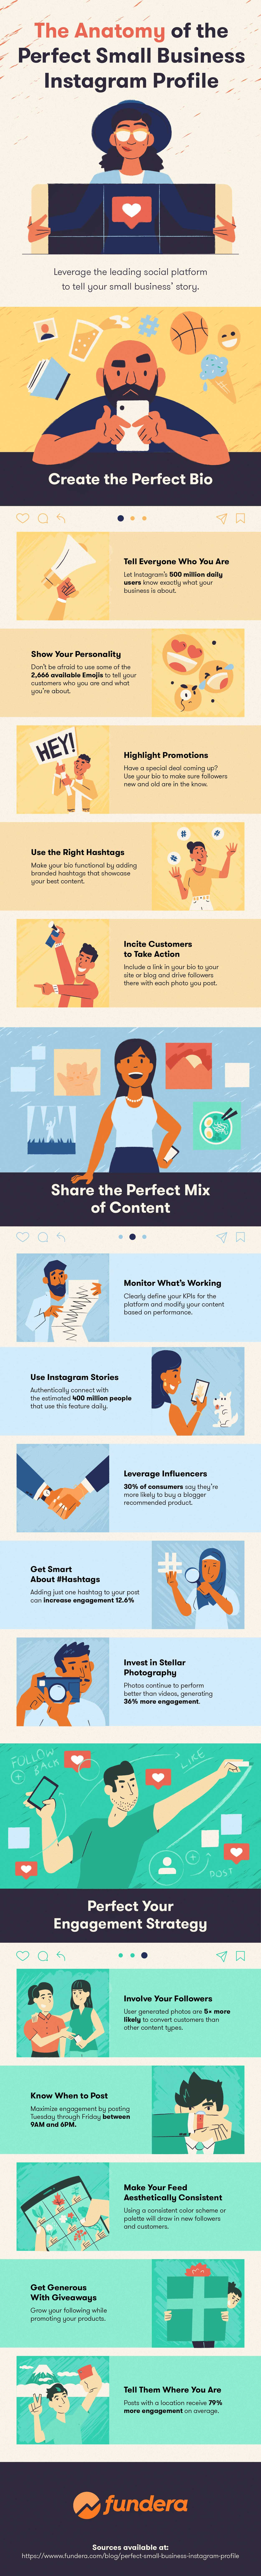 The Anatomy of the Perfect Small Business Instagram Profile